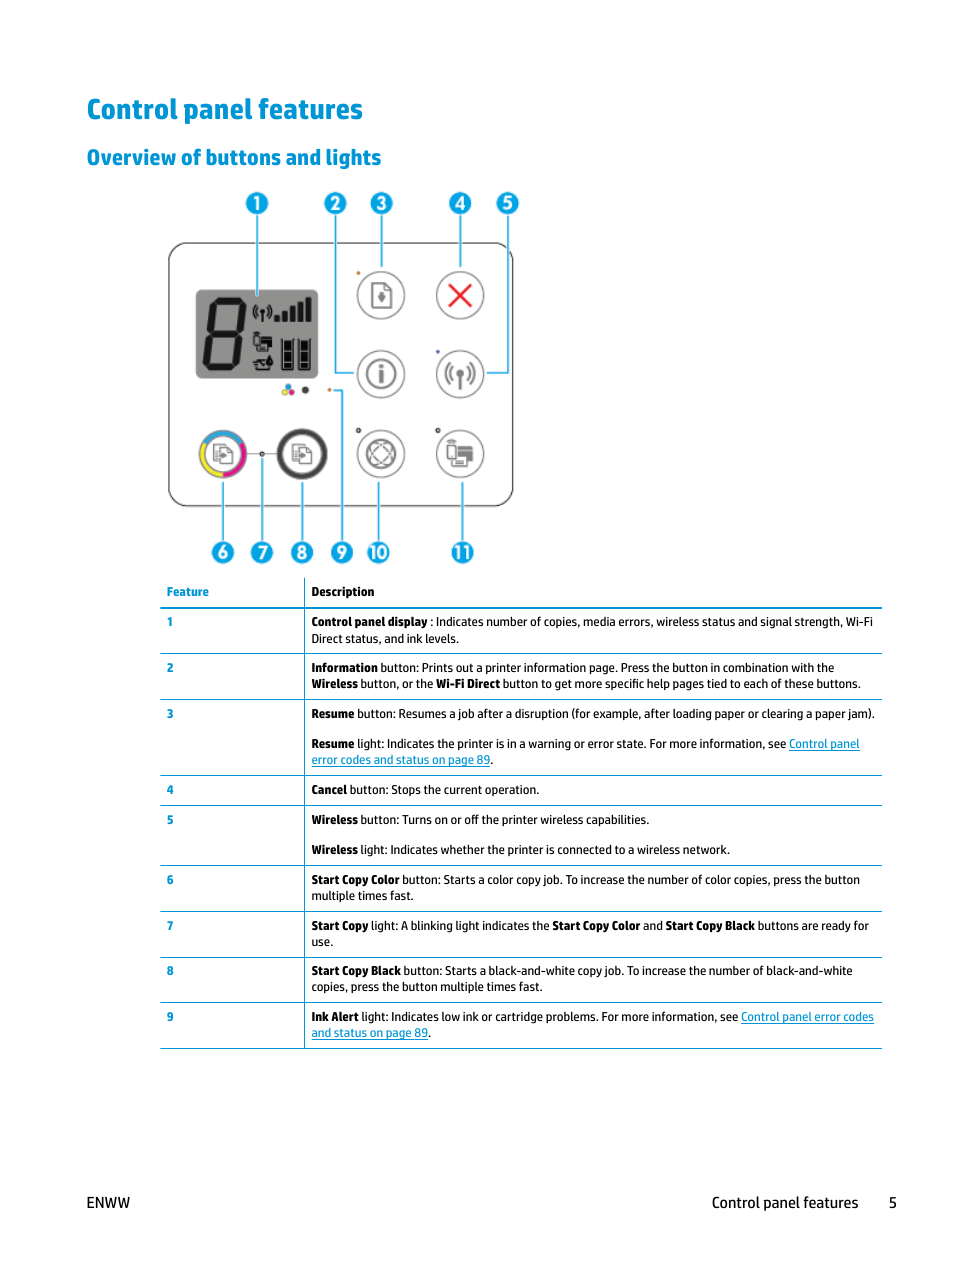 Control panel features, Overview of buttons and lights | HP DeskJet